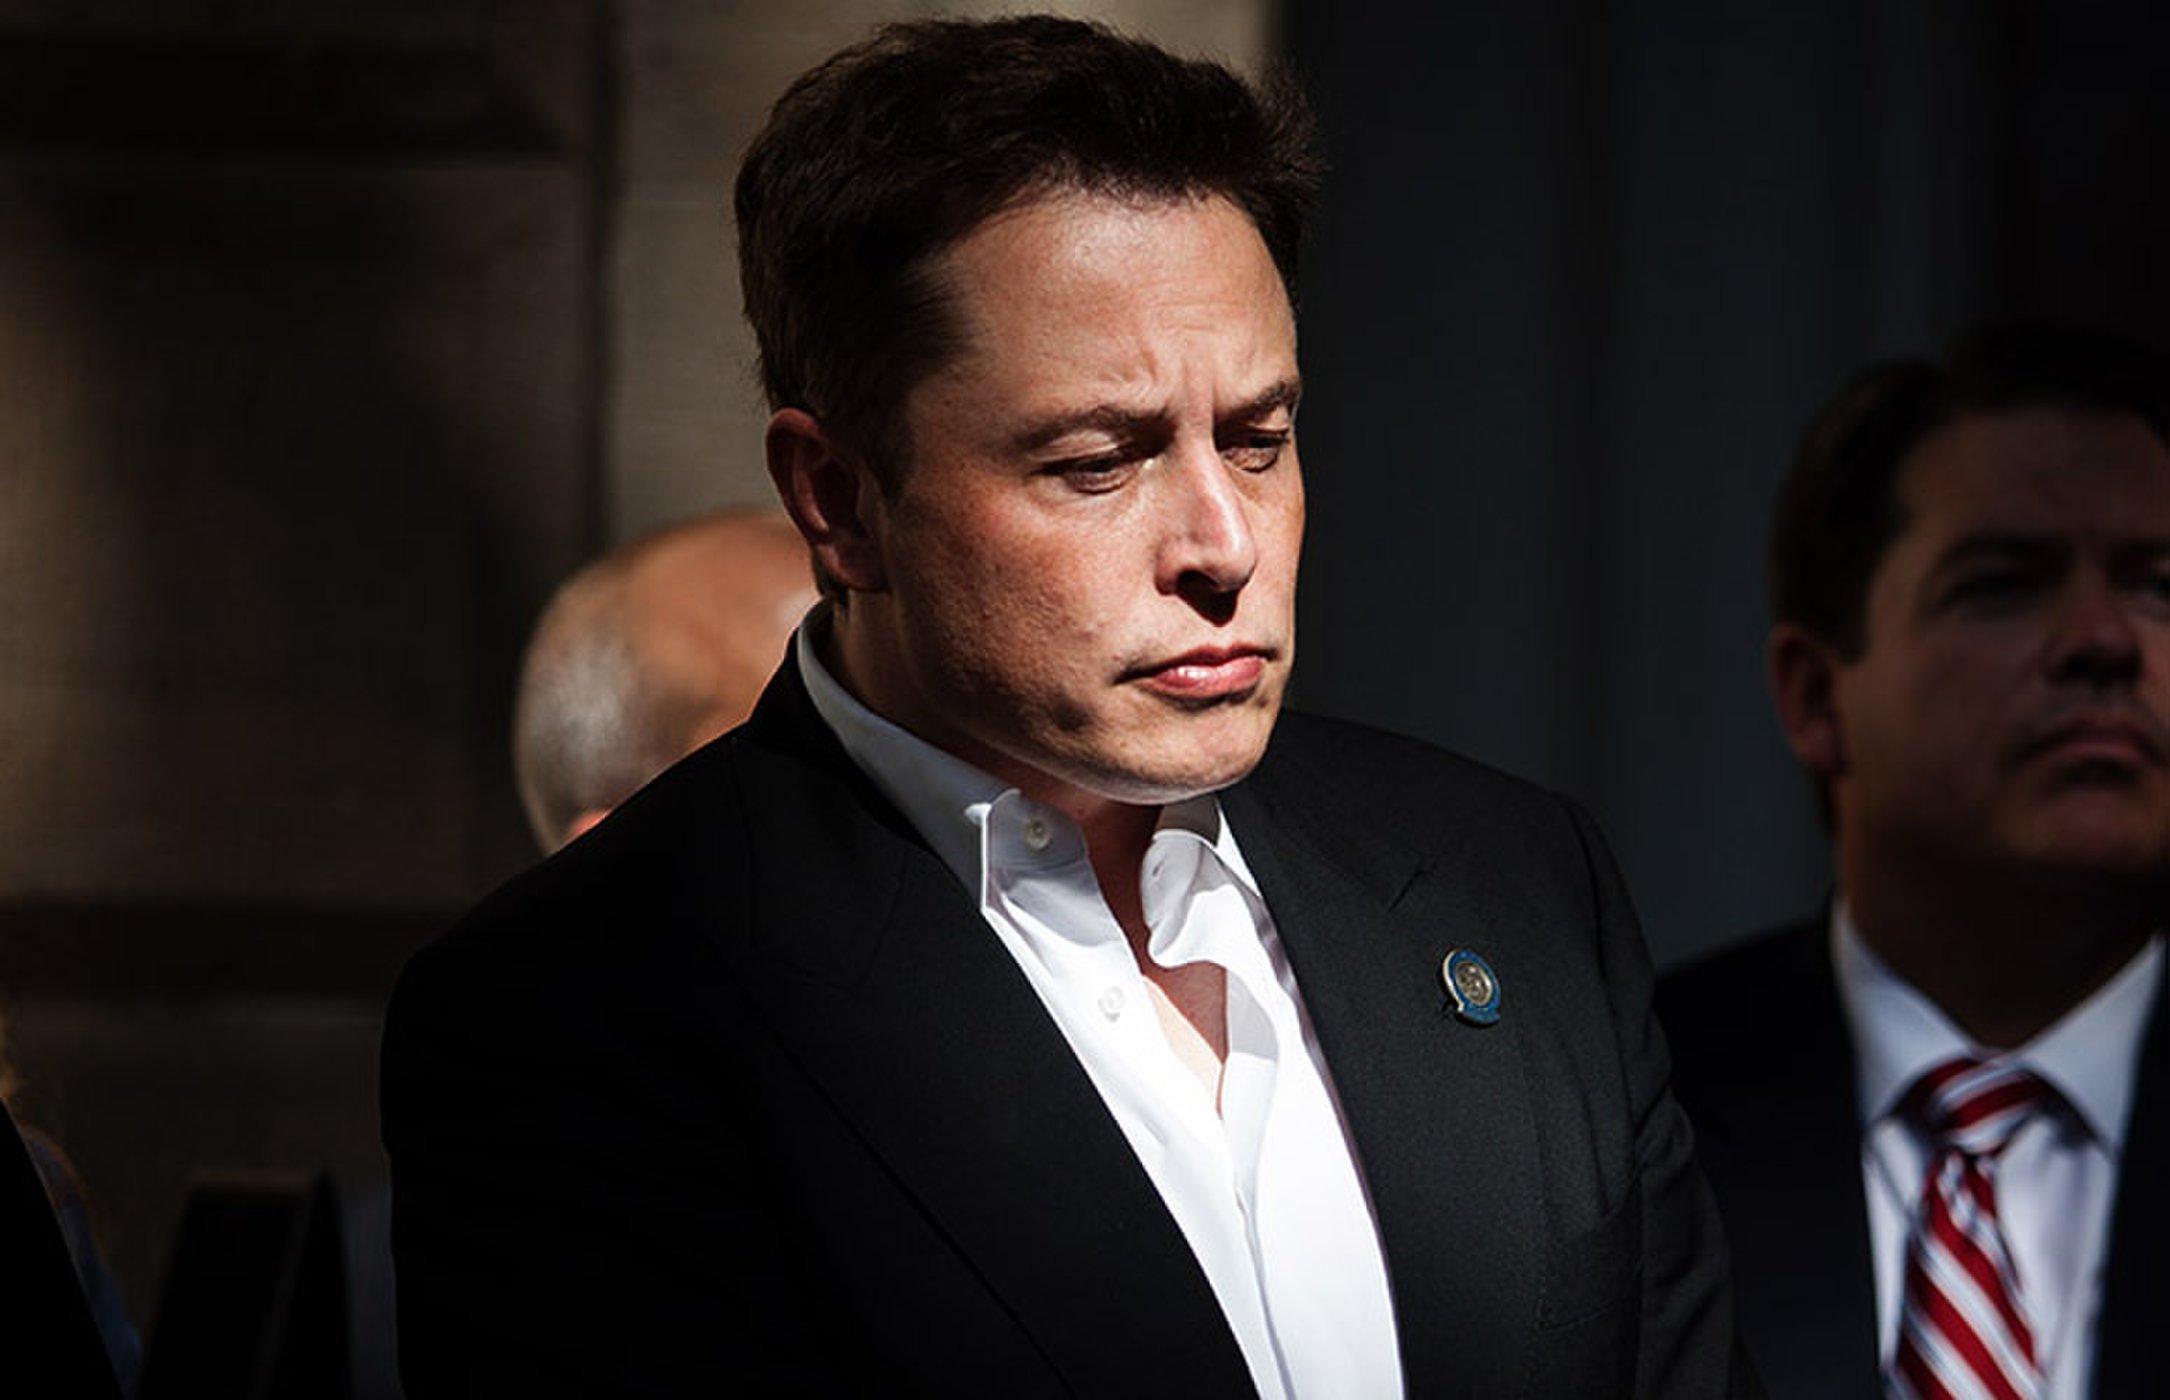 Elon Musk predicted the emergence of a ruthless AI dictator